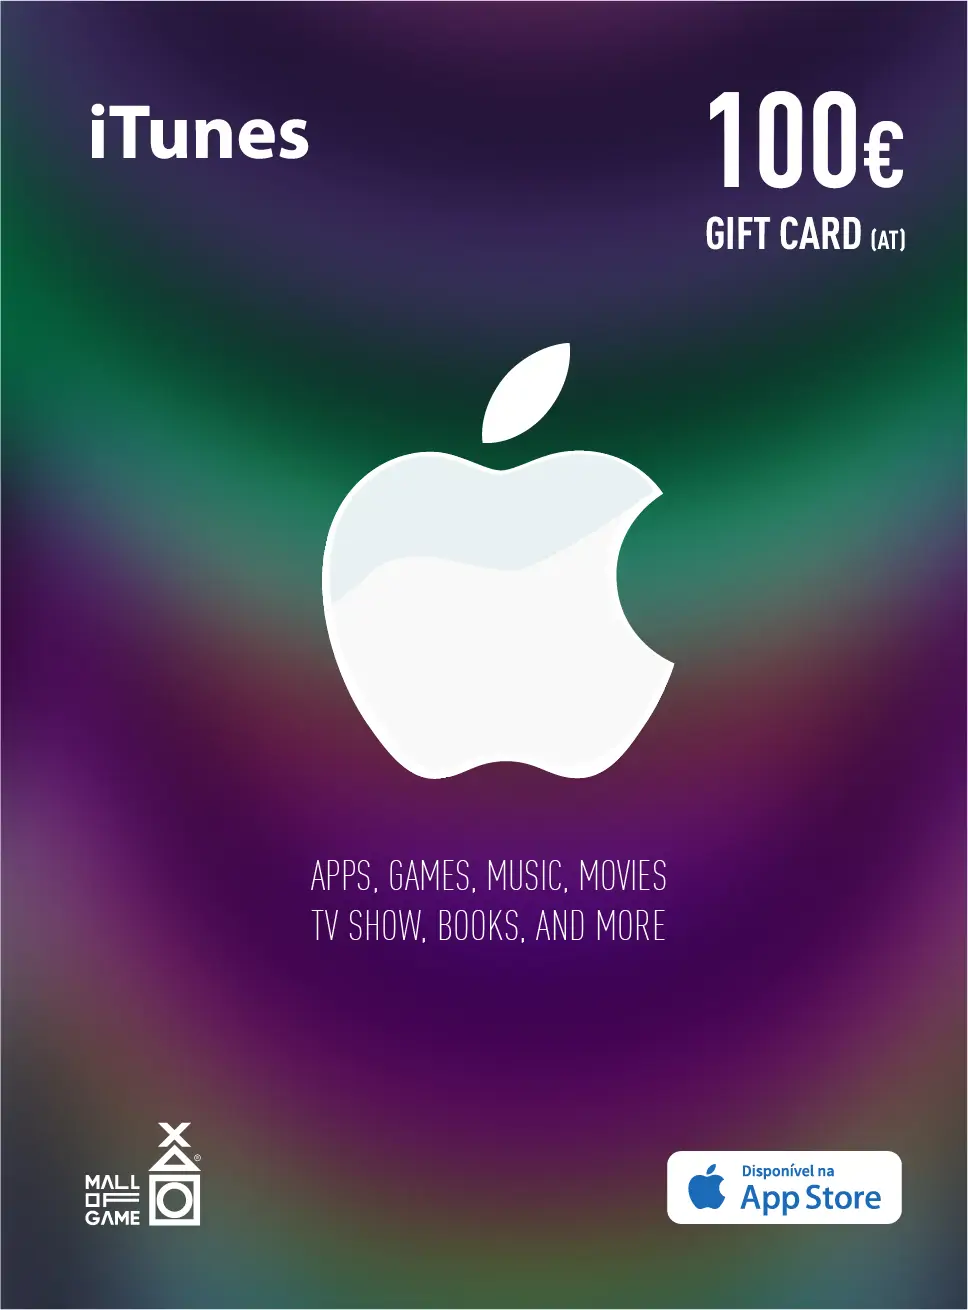 EUR100 iTunes Gift Card (AT)